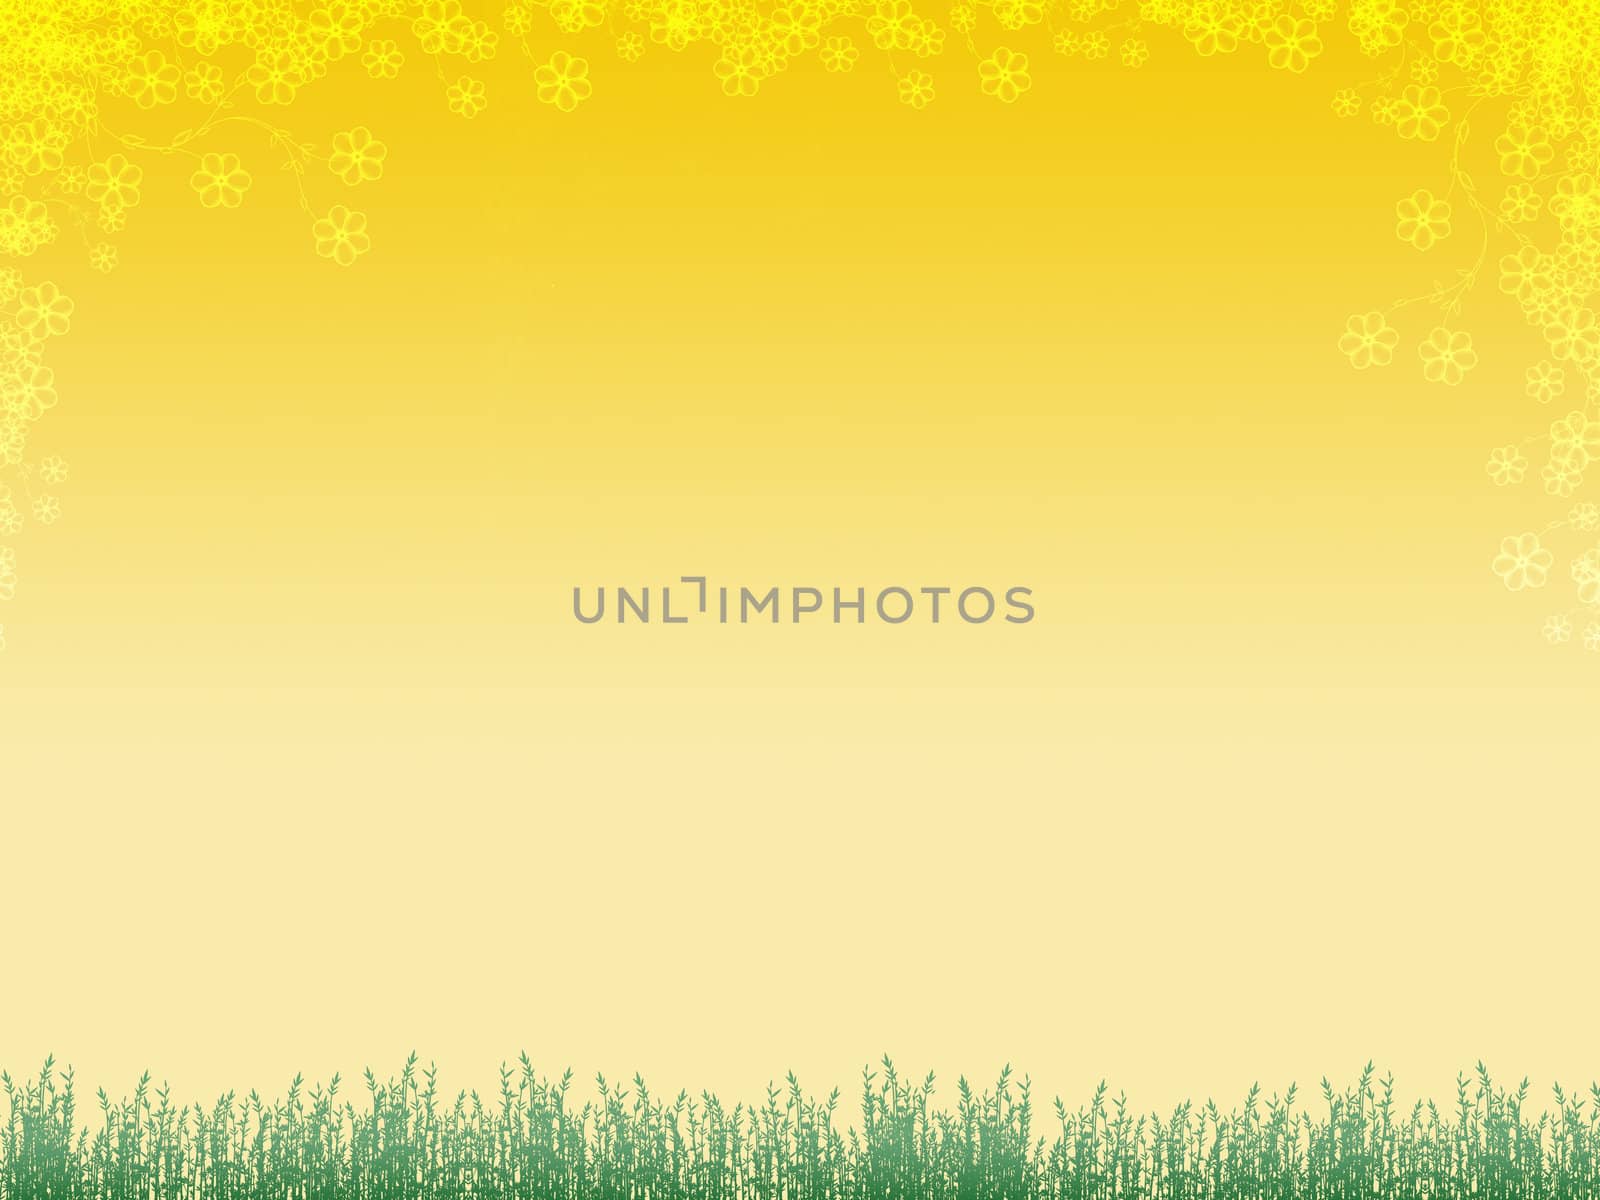 Background with green grass and yellow flowers.